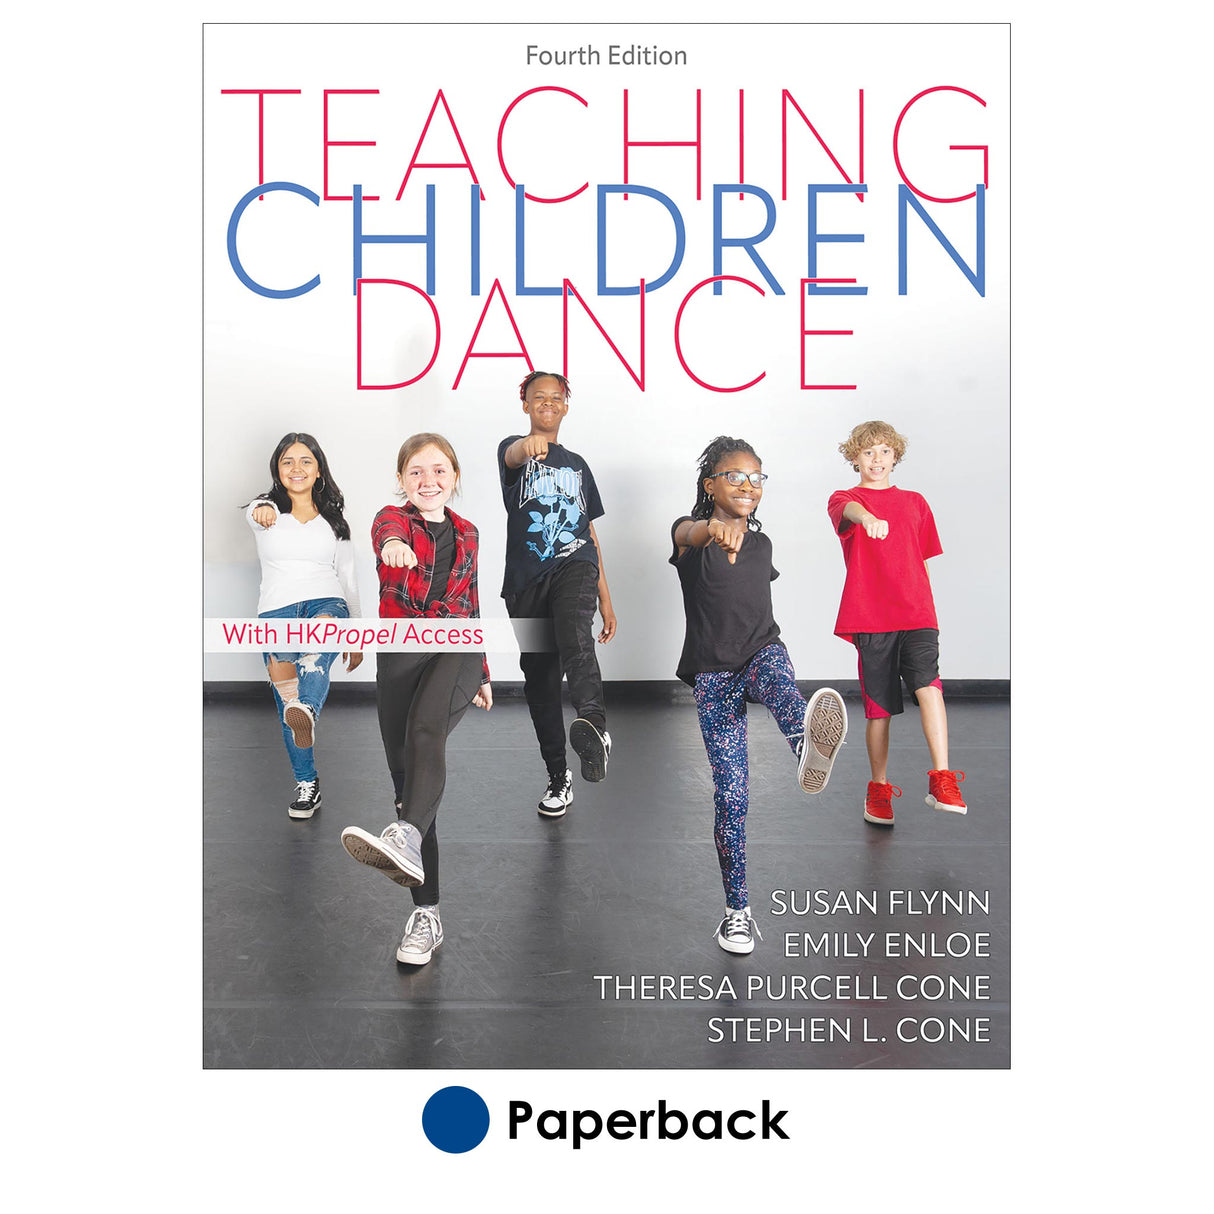 Teaching Children Dance 4th Edition With HKPropel Access